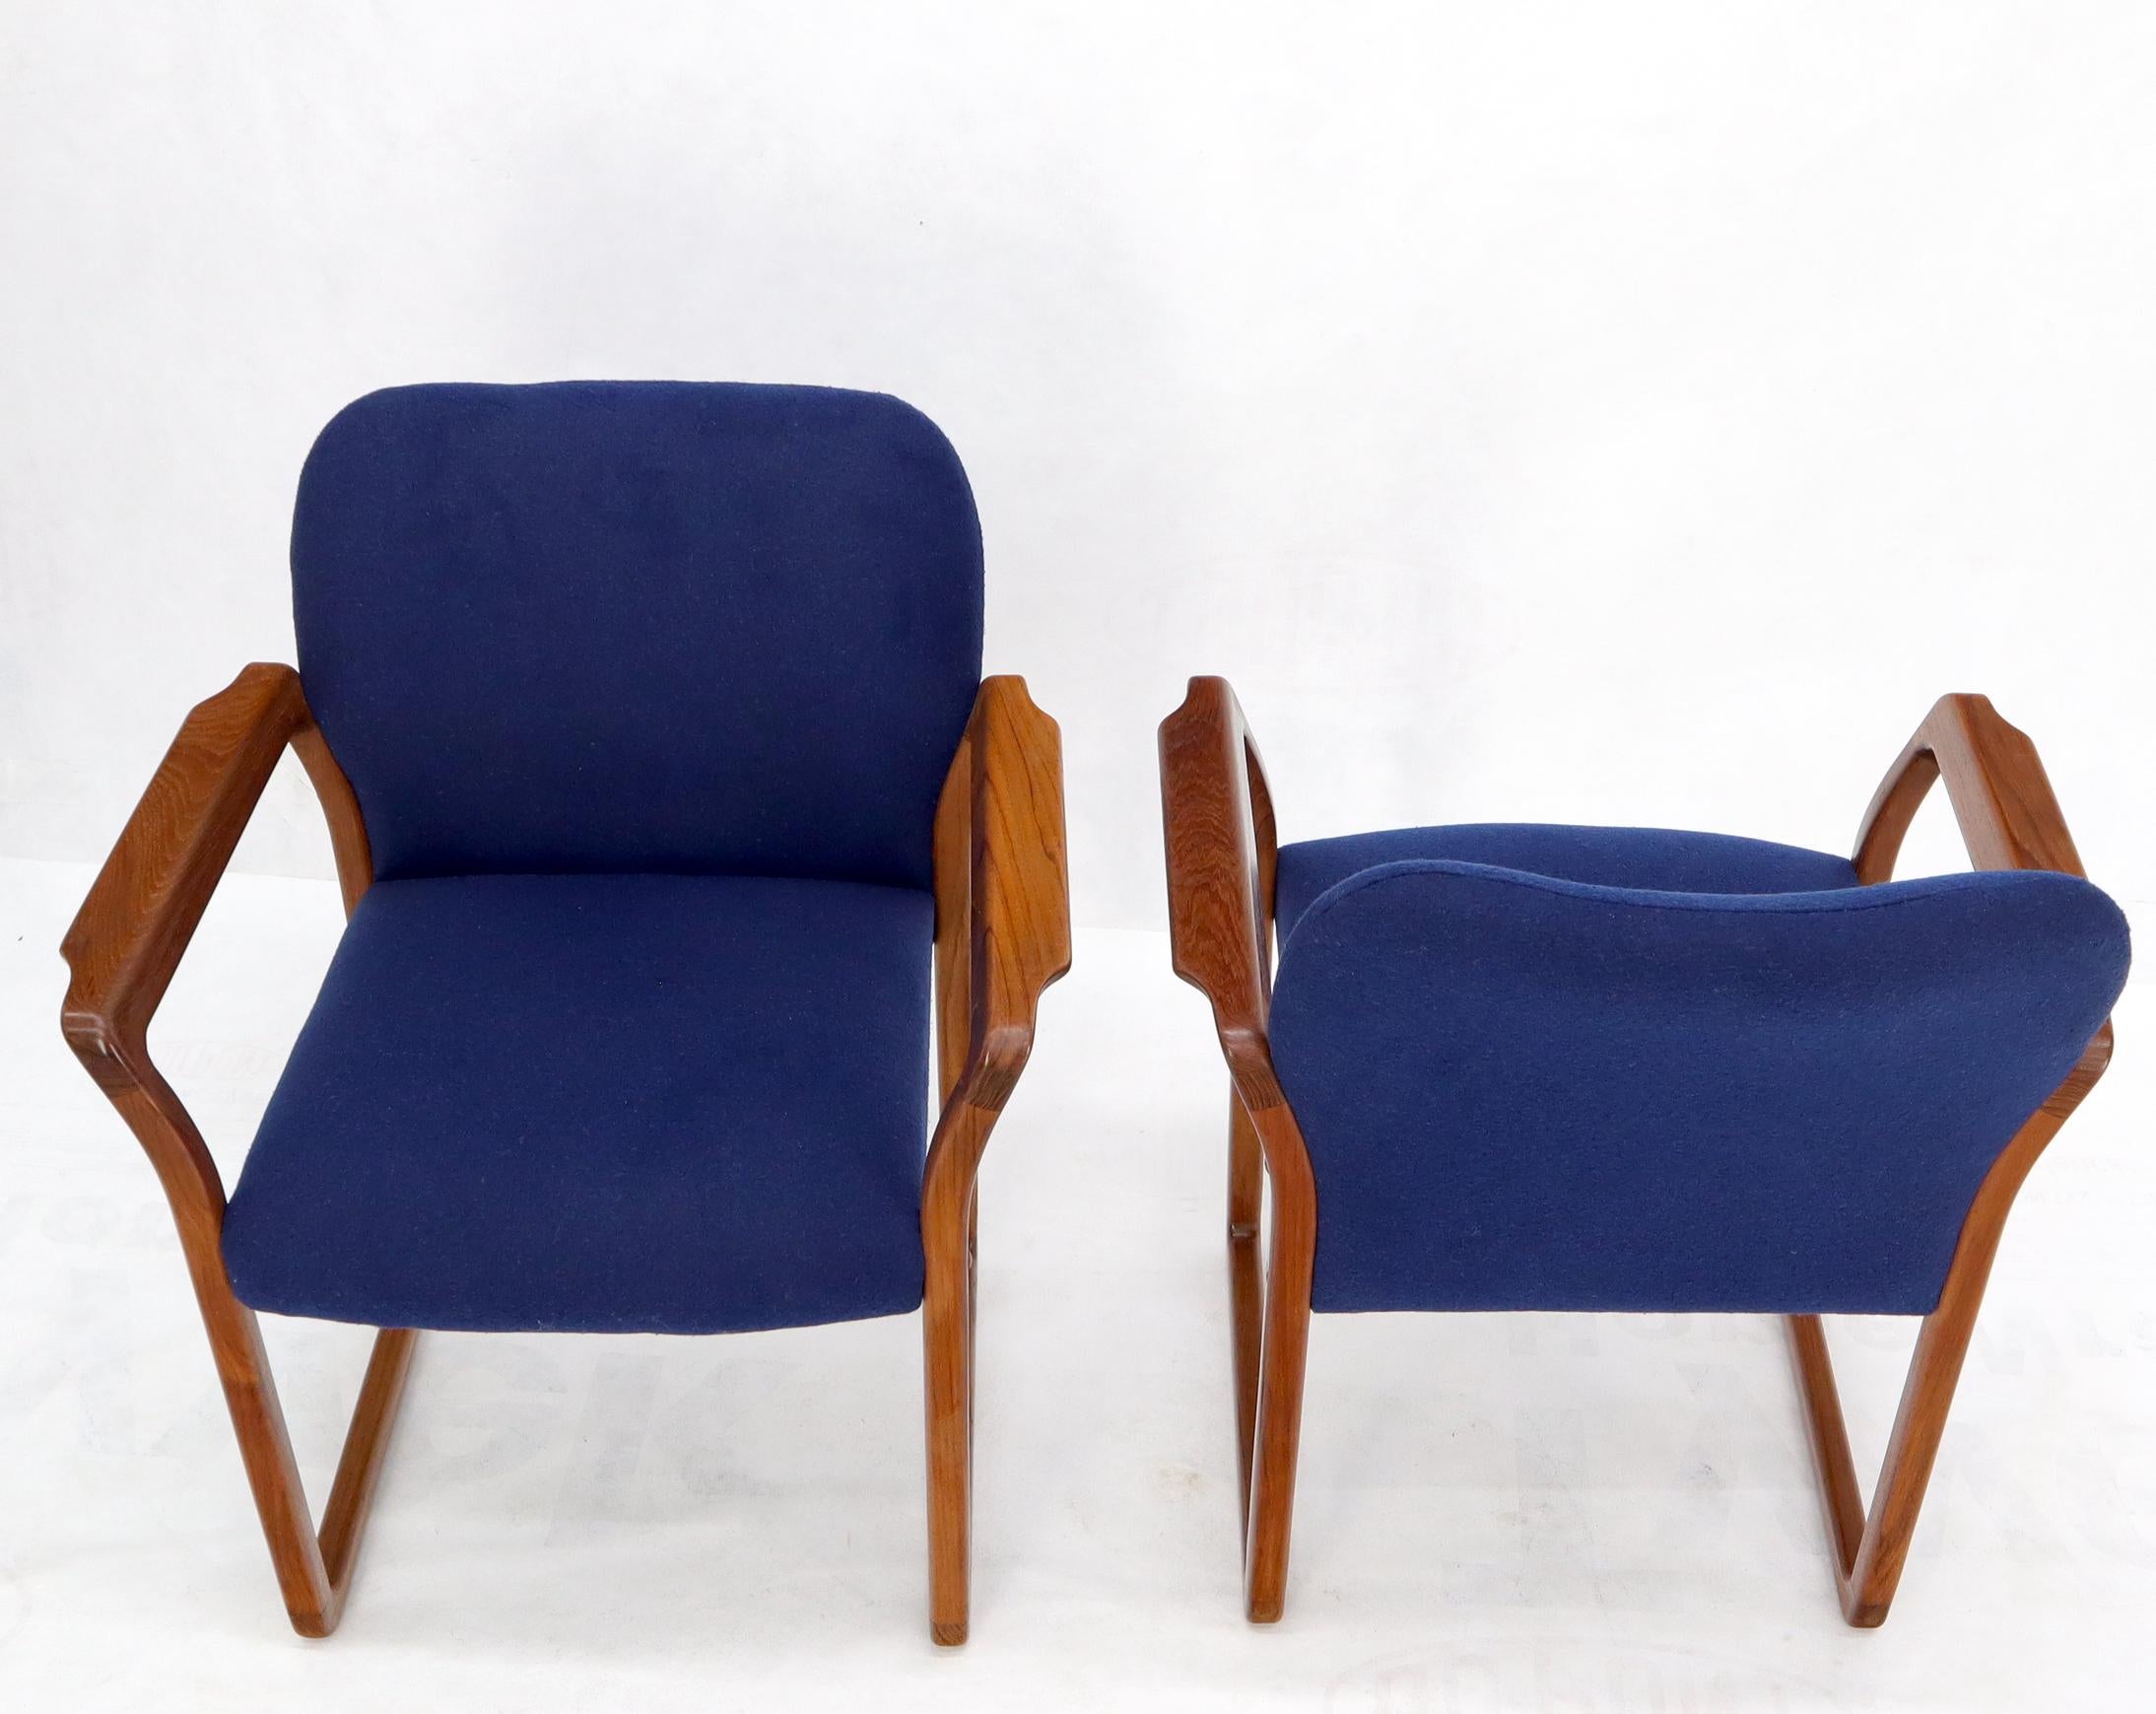 Pair of Danish Mid-Century Modern Teak Arms Chairs New Wool Upholstery For Sale 5